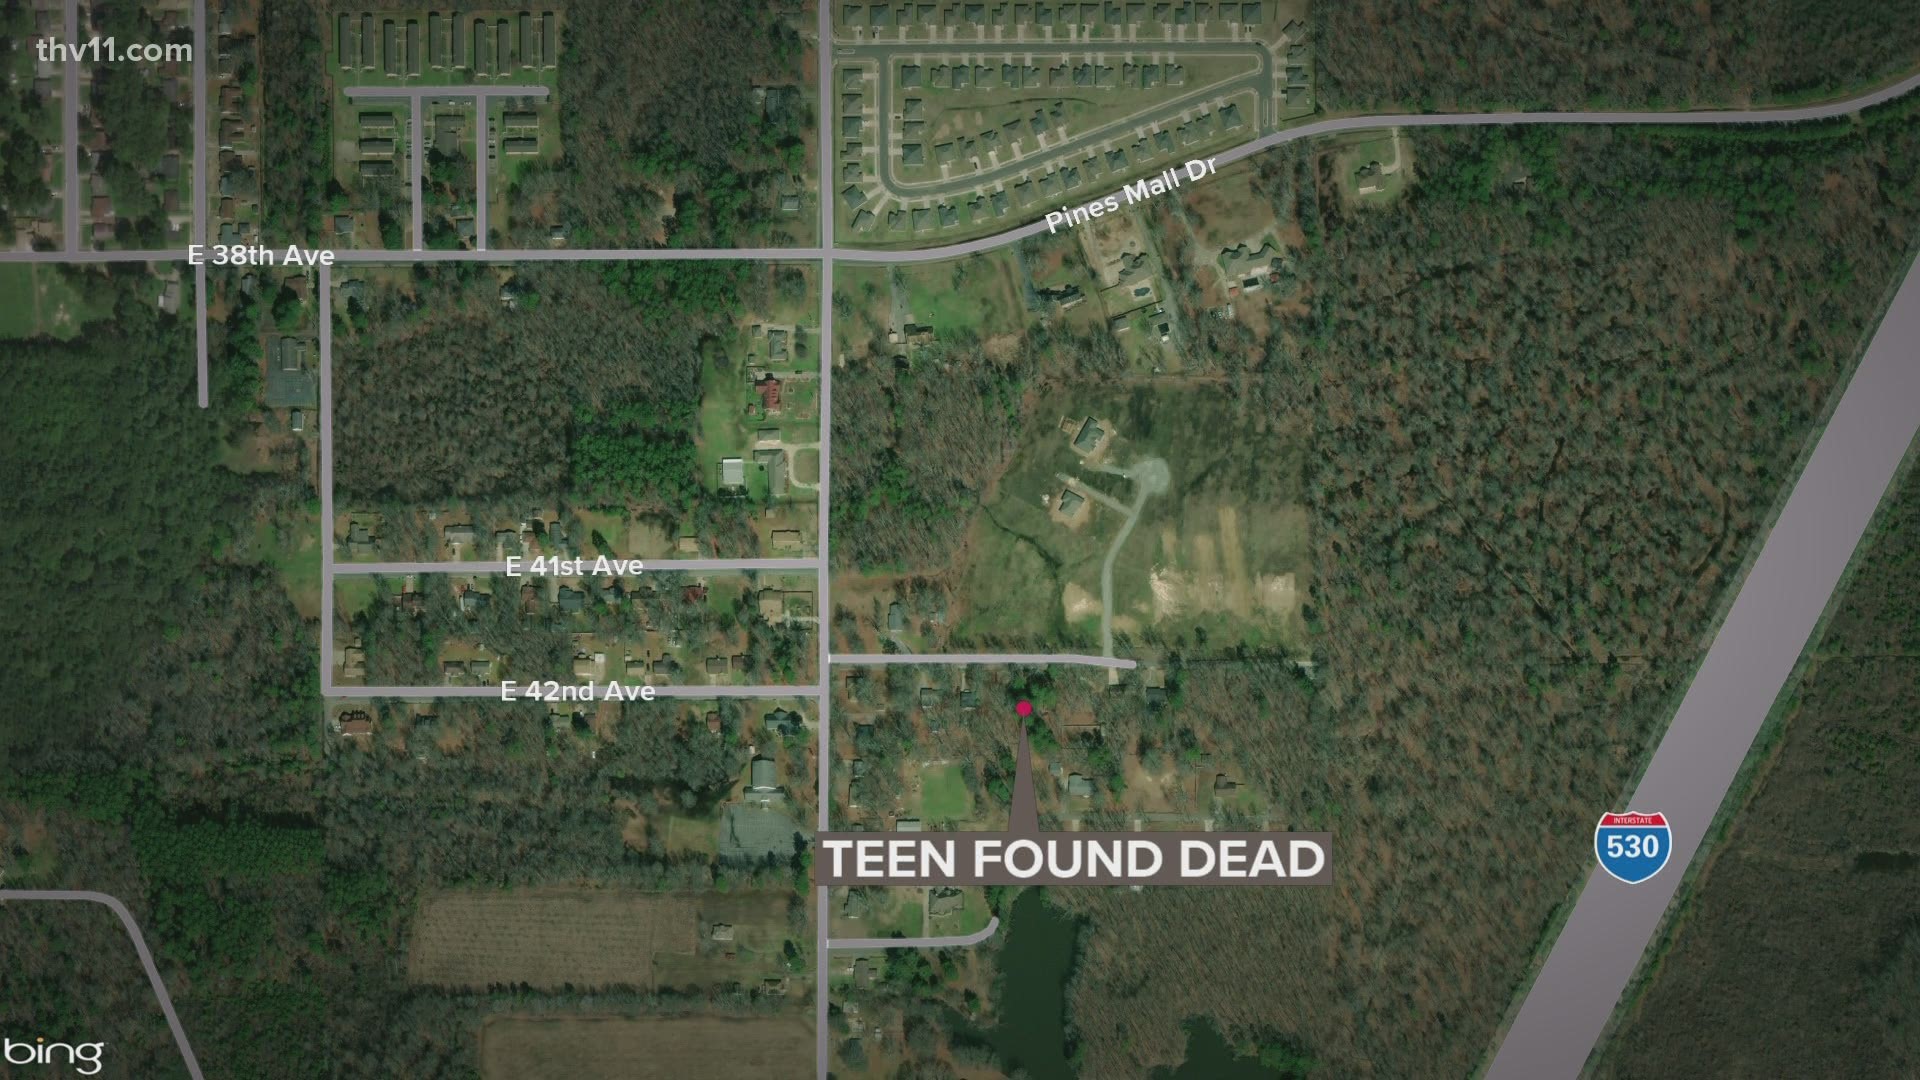 Police in Pine Bluff are investigating a homicide after finding a teenager dead.